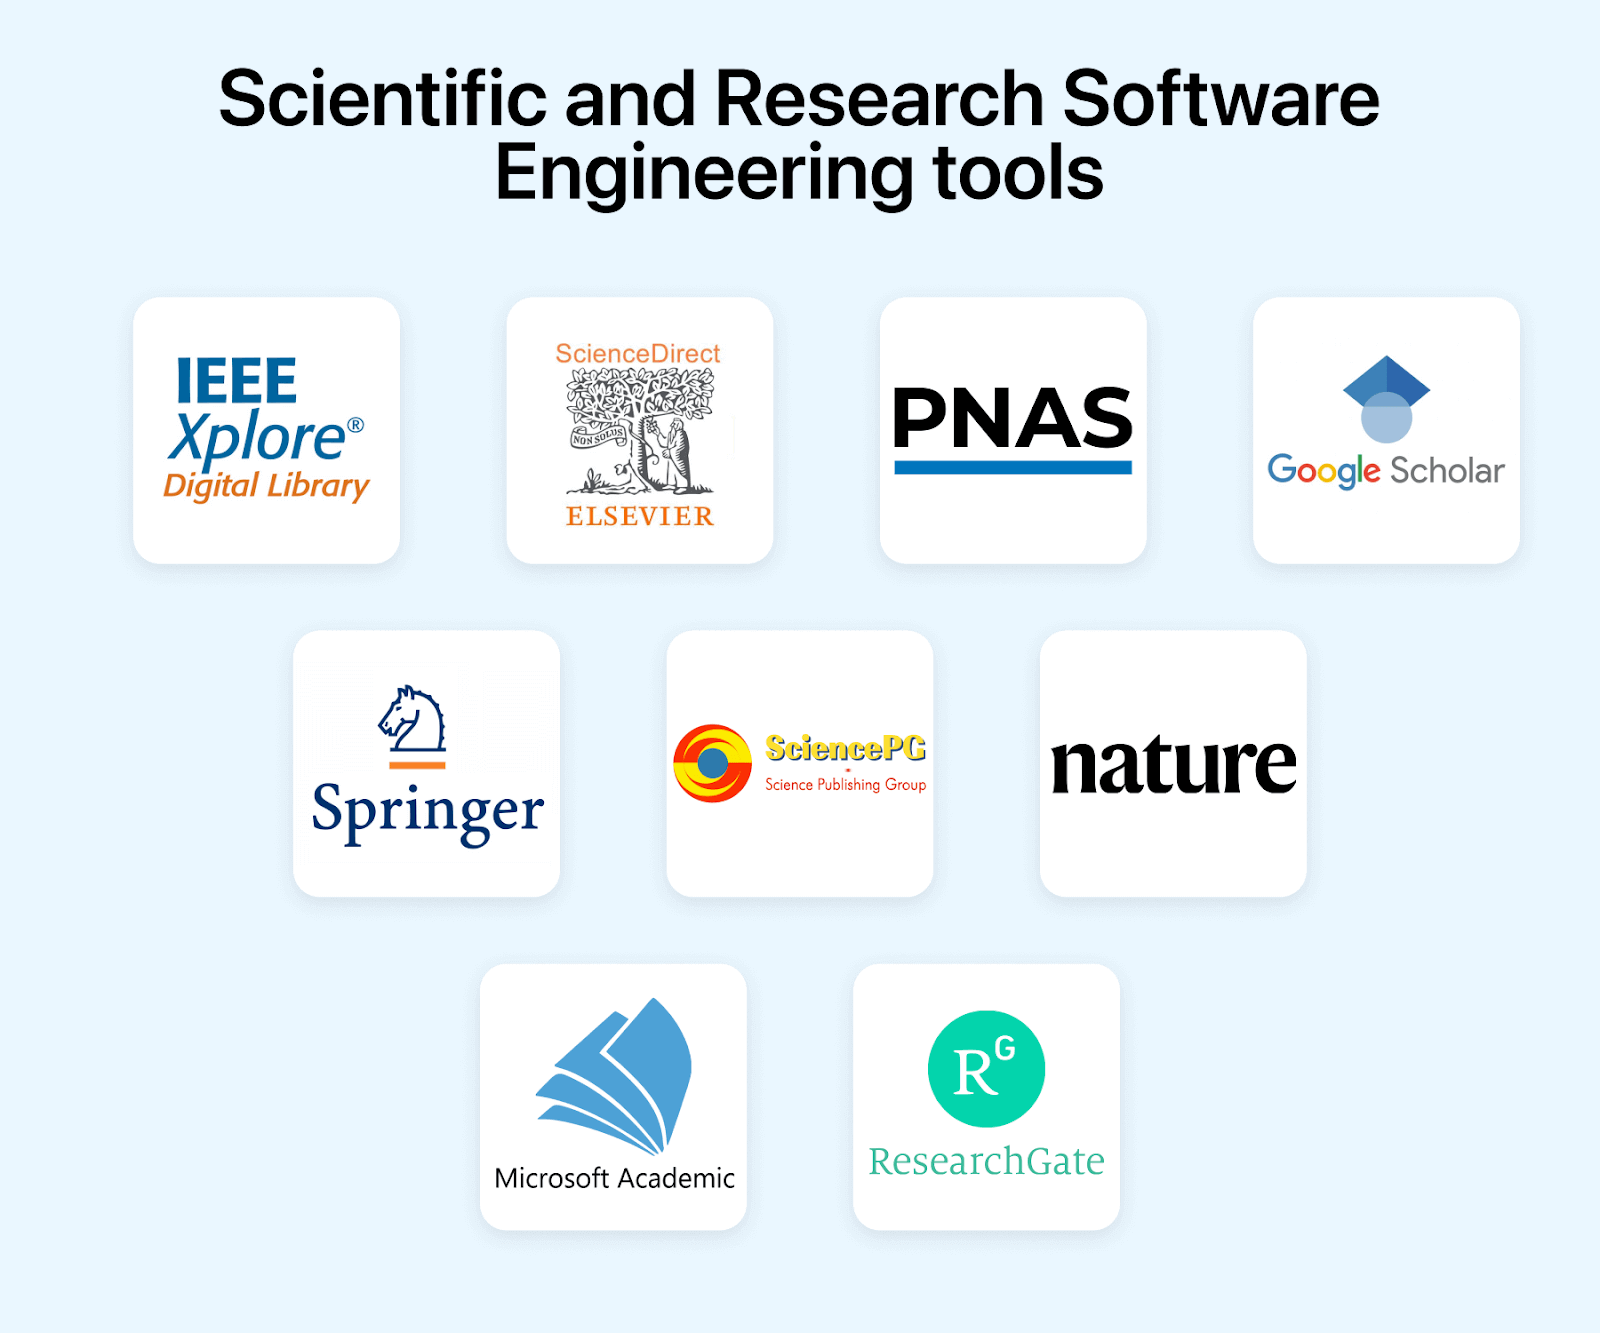 Scientific and Research Software Engineering